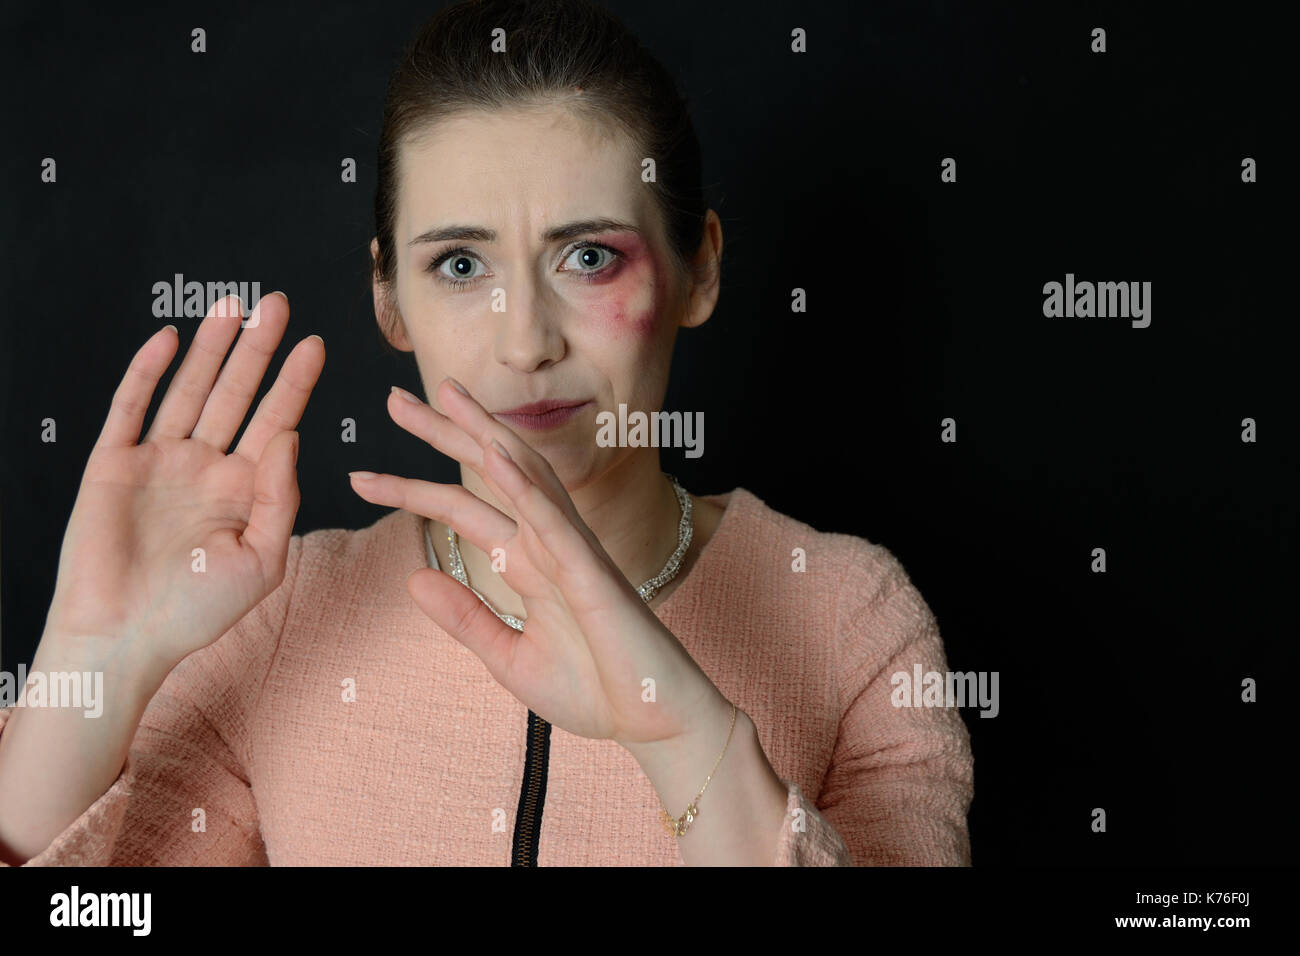 Home violence. Beaten woman with injuries on face, bleeding, black eye. Woman defending herself. Stock Photo